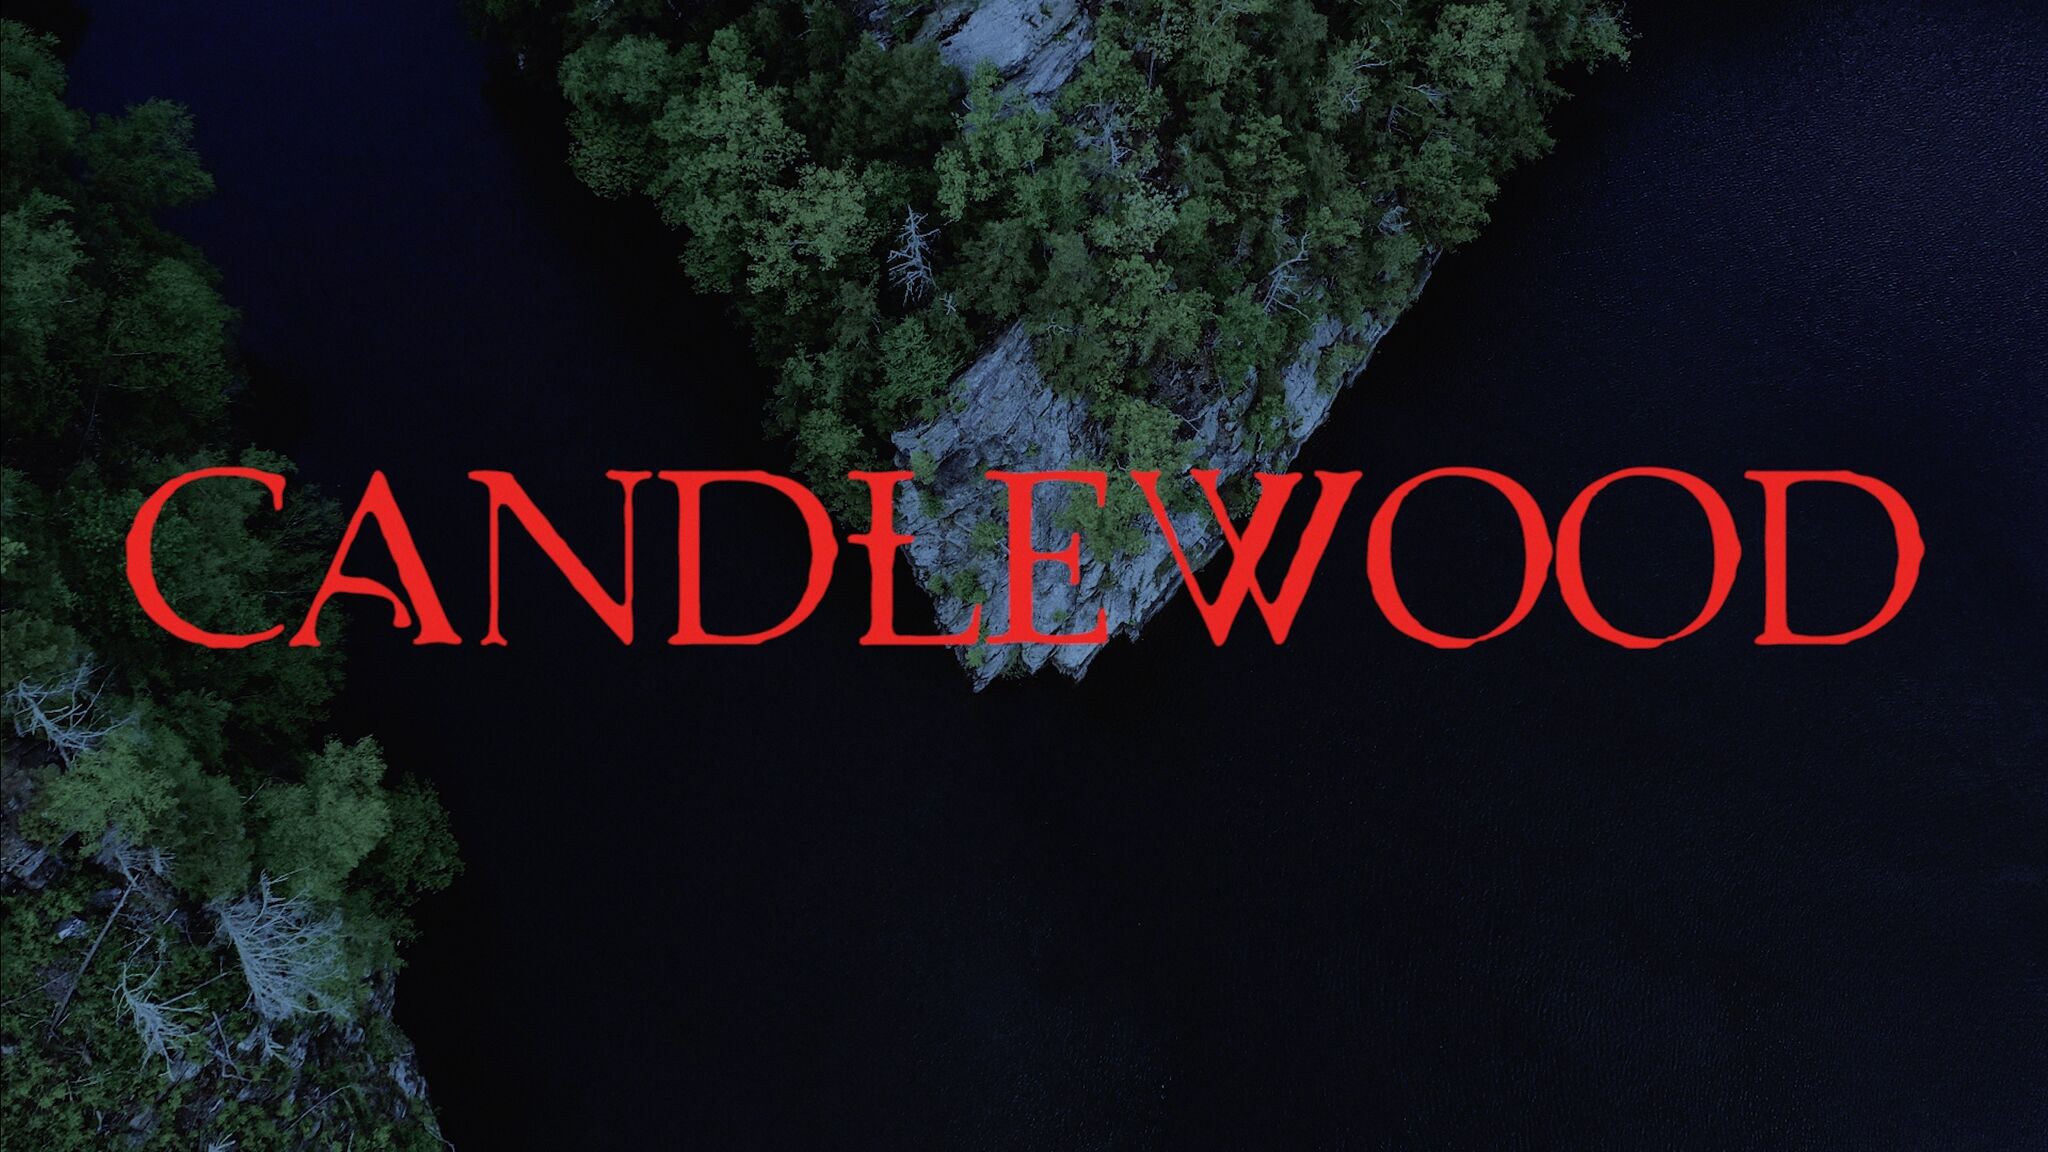 'Candlewood' horror movie set to explore urban legends of New Milford